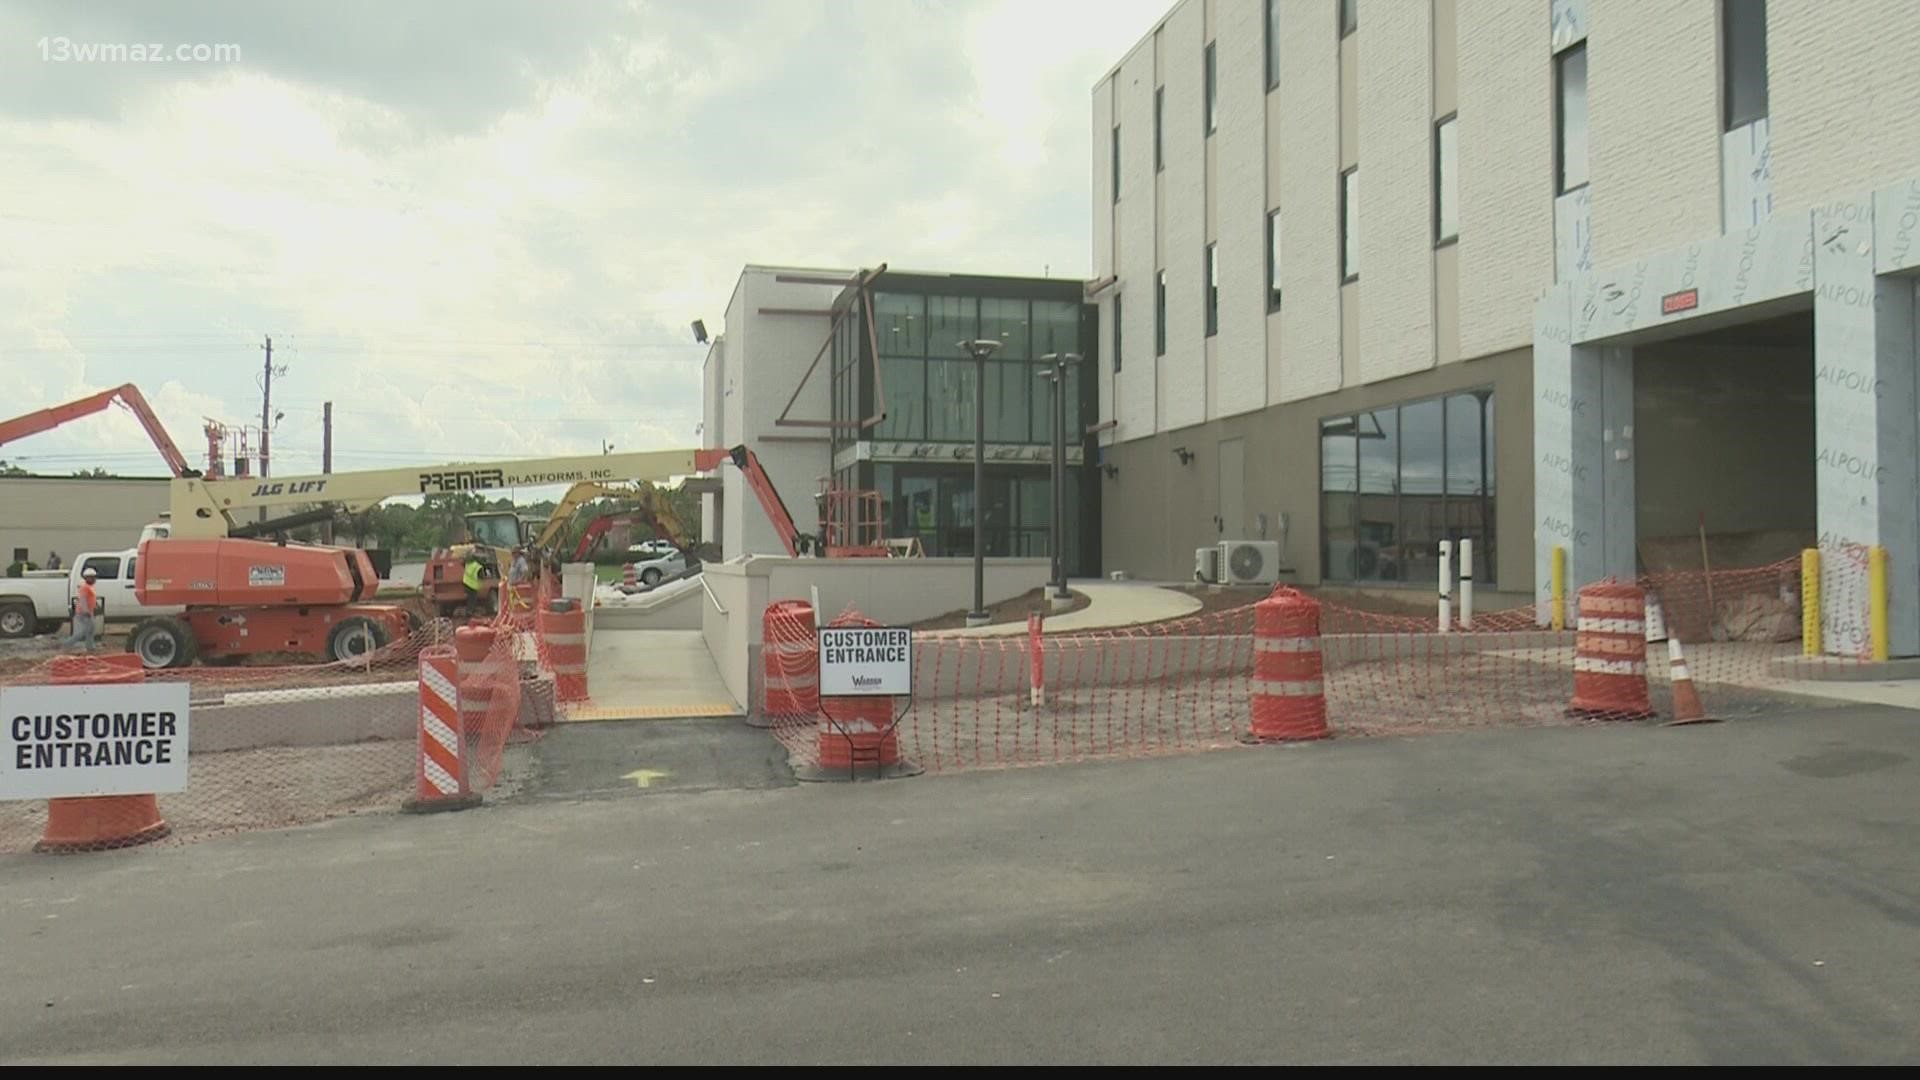 The Macon Water Authority has moved their lobby while working on renovations for their headquarters on Second Street.